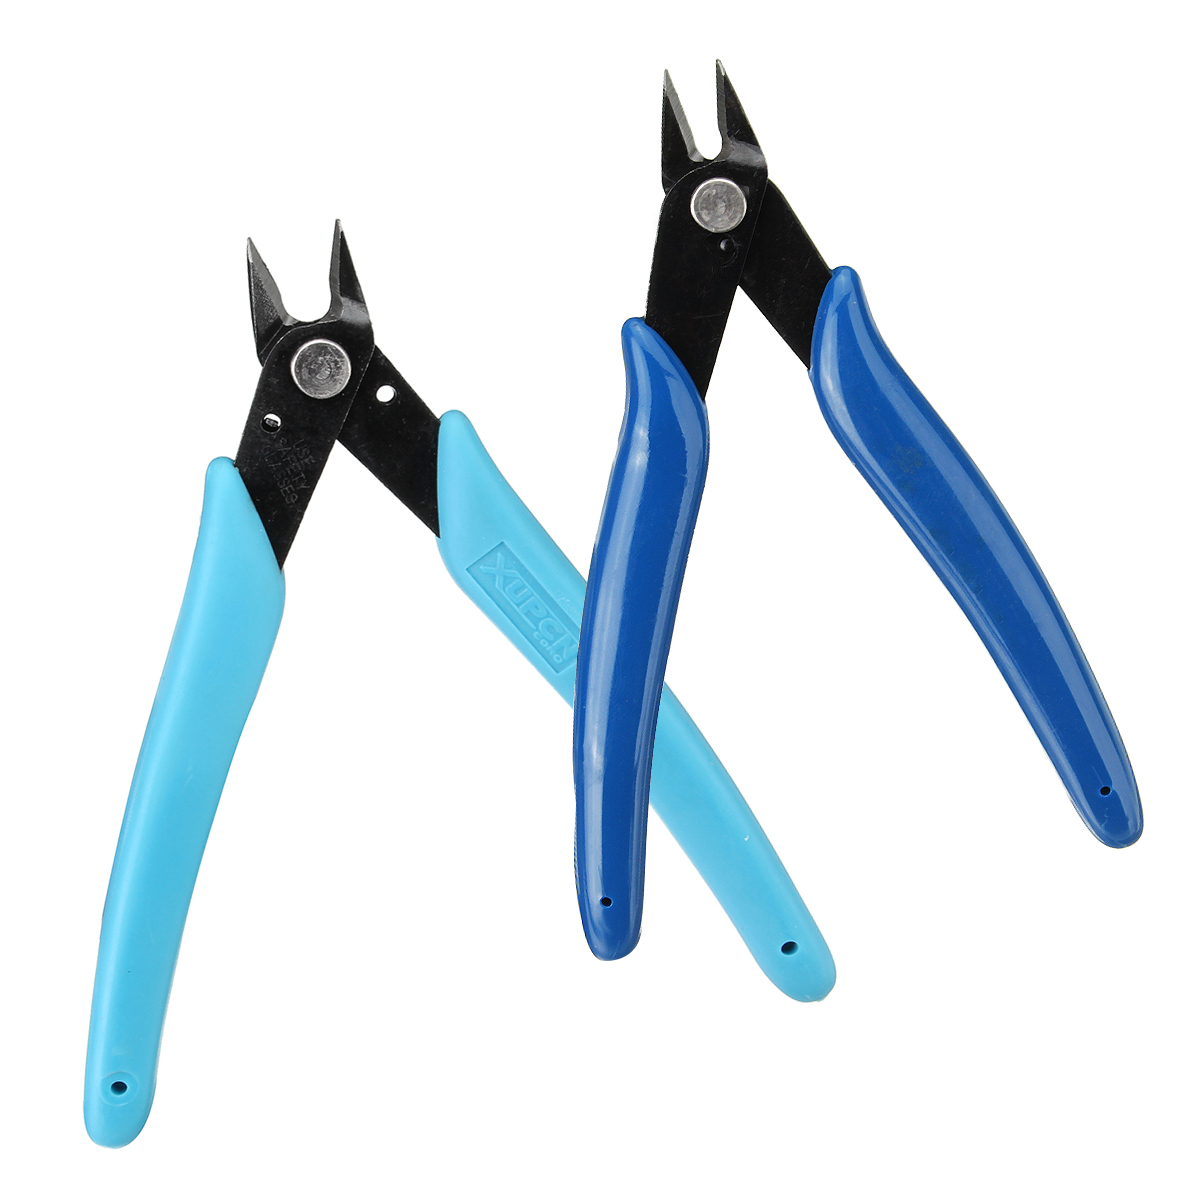 Pliers-Nipper-H-Practical-Electrical-Wire-Cable-Cutter-Cutting-Side-Snips-Flush-Pliers-Mini-Pliers-1371806-4